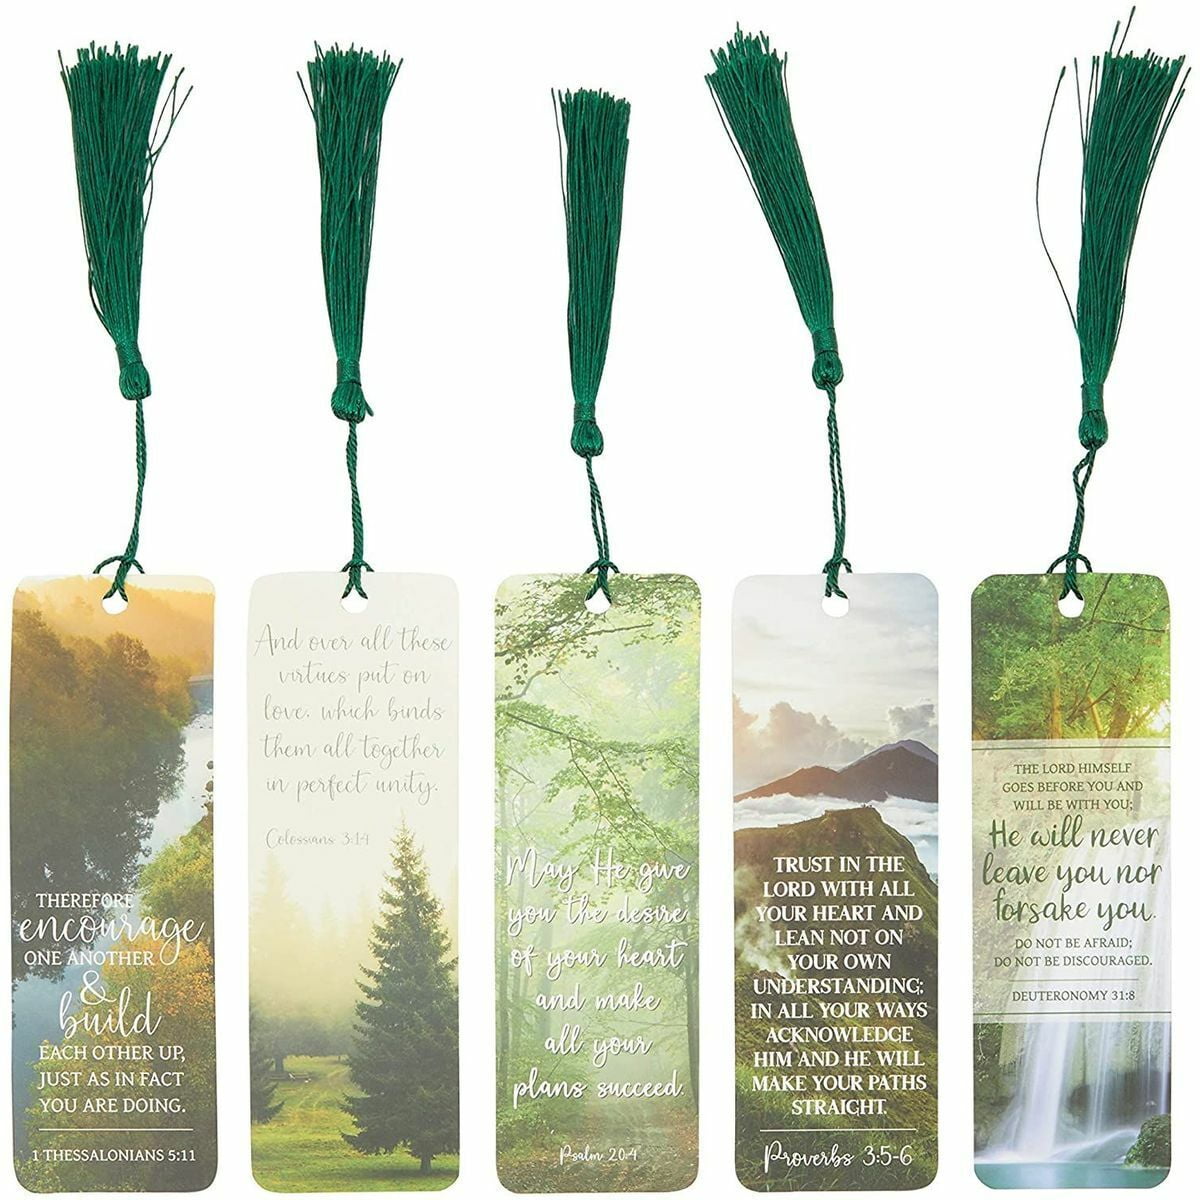 NEW: (6) Sacchi & Paperchase Inspirational Bookmarks with Tassels FREE  SHIPPING